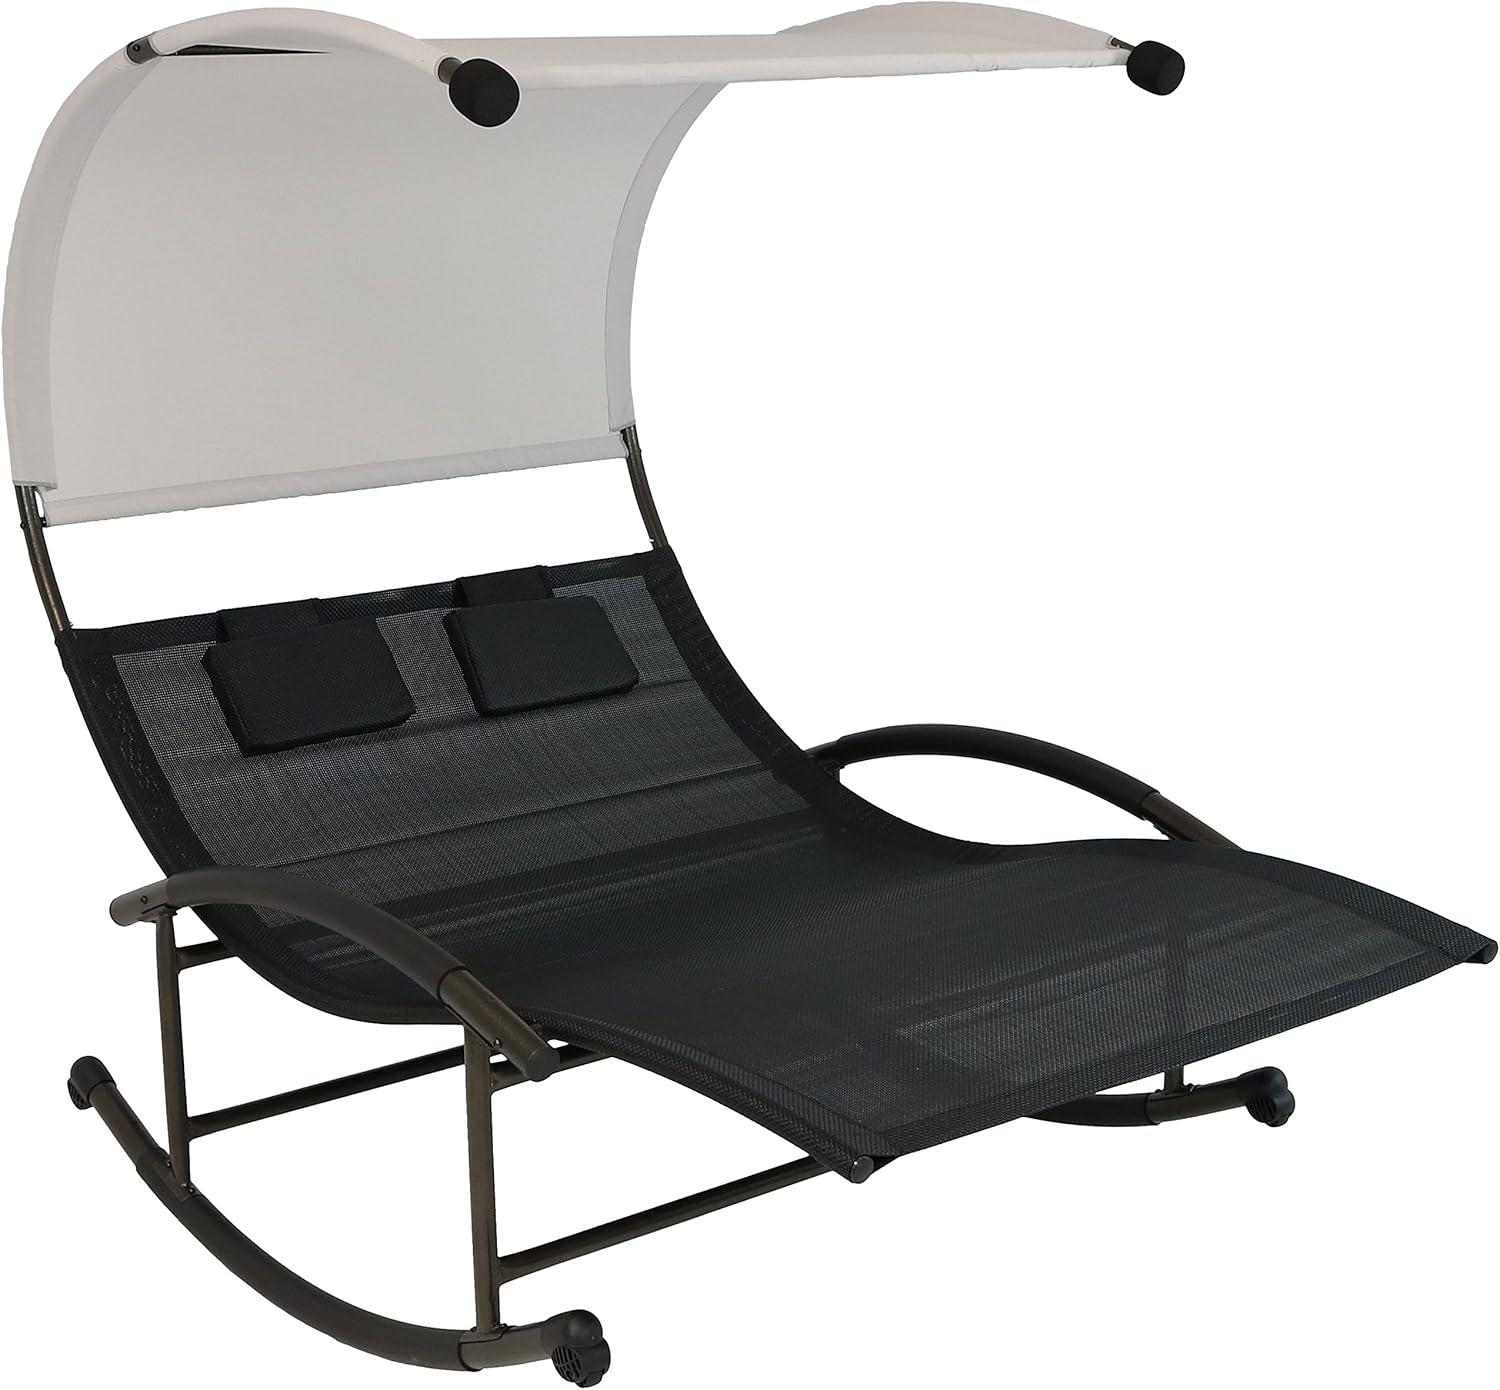 Black Double Chaise Rocking Lounge with Canopy and Cushions